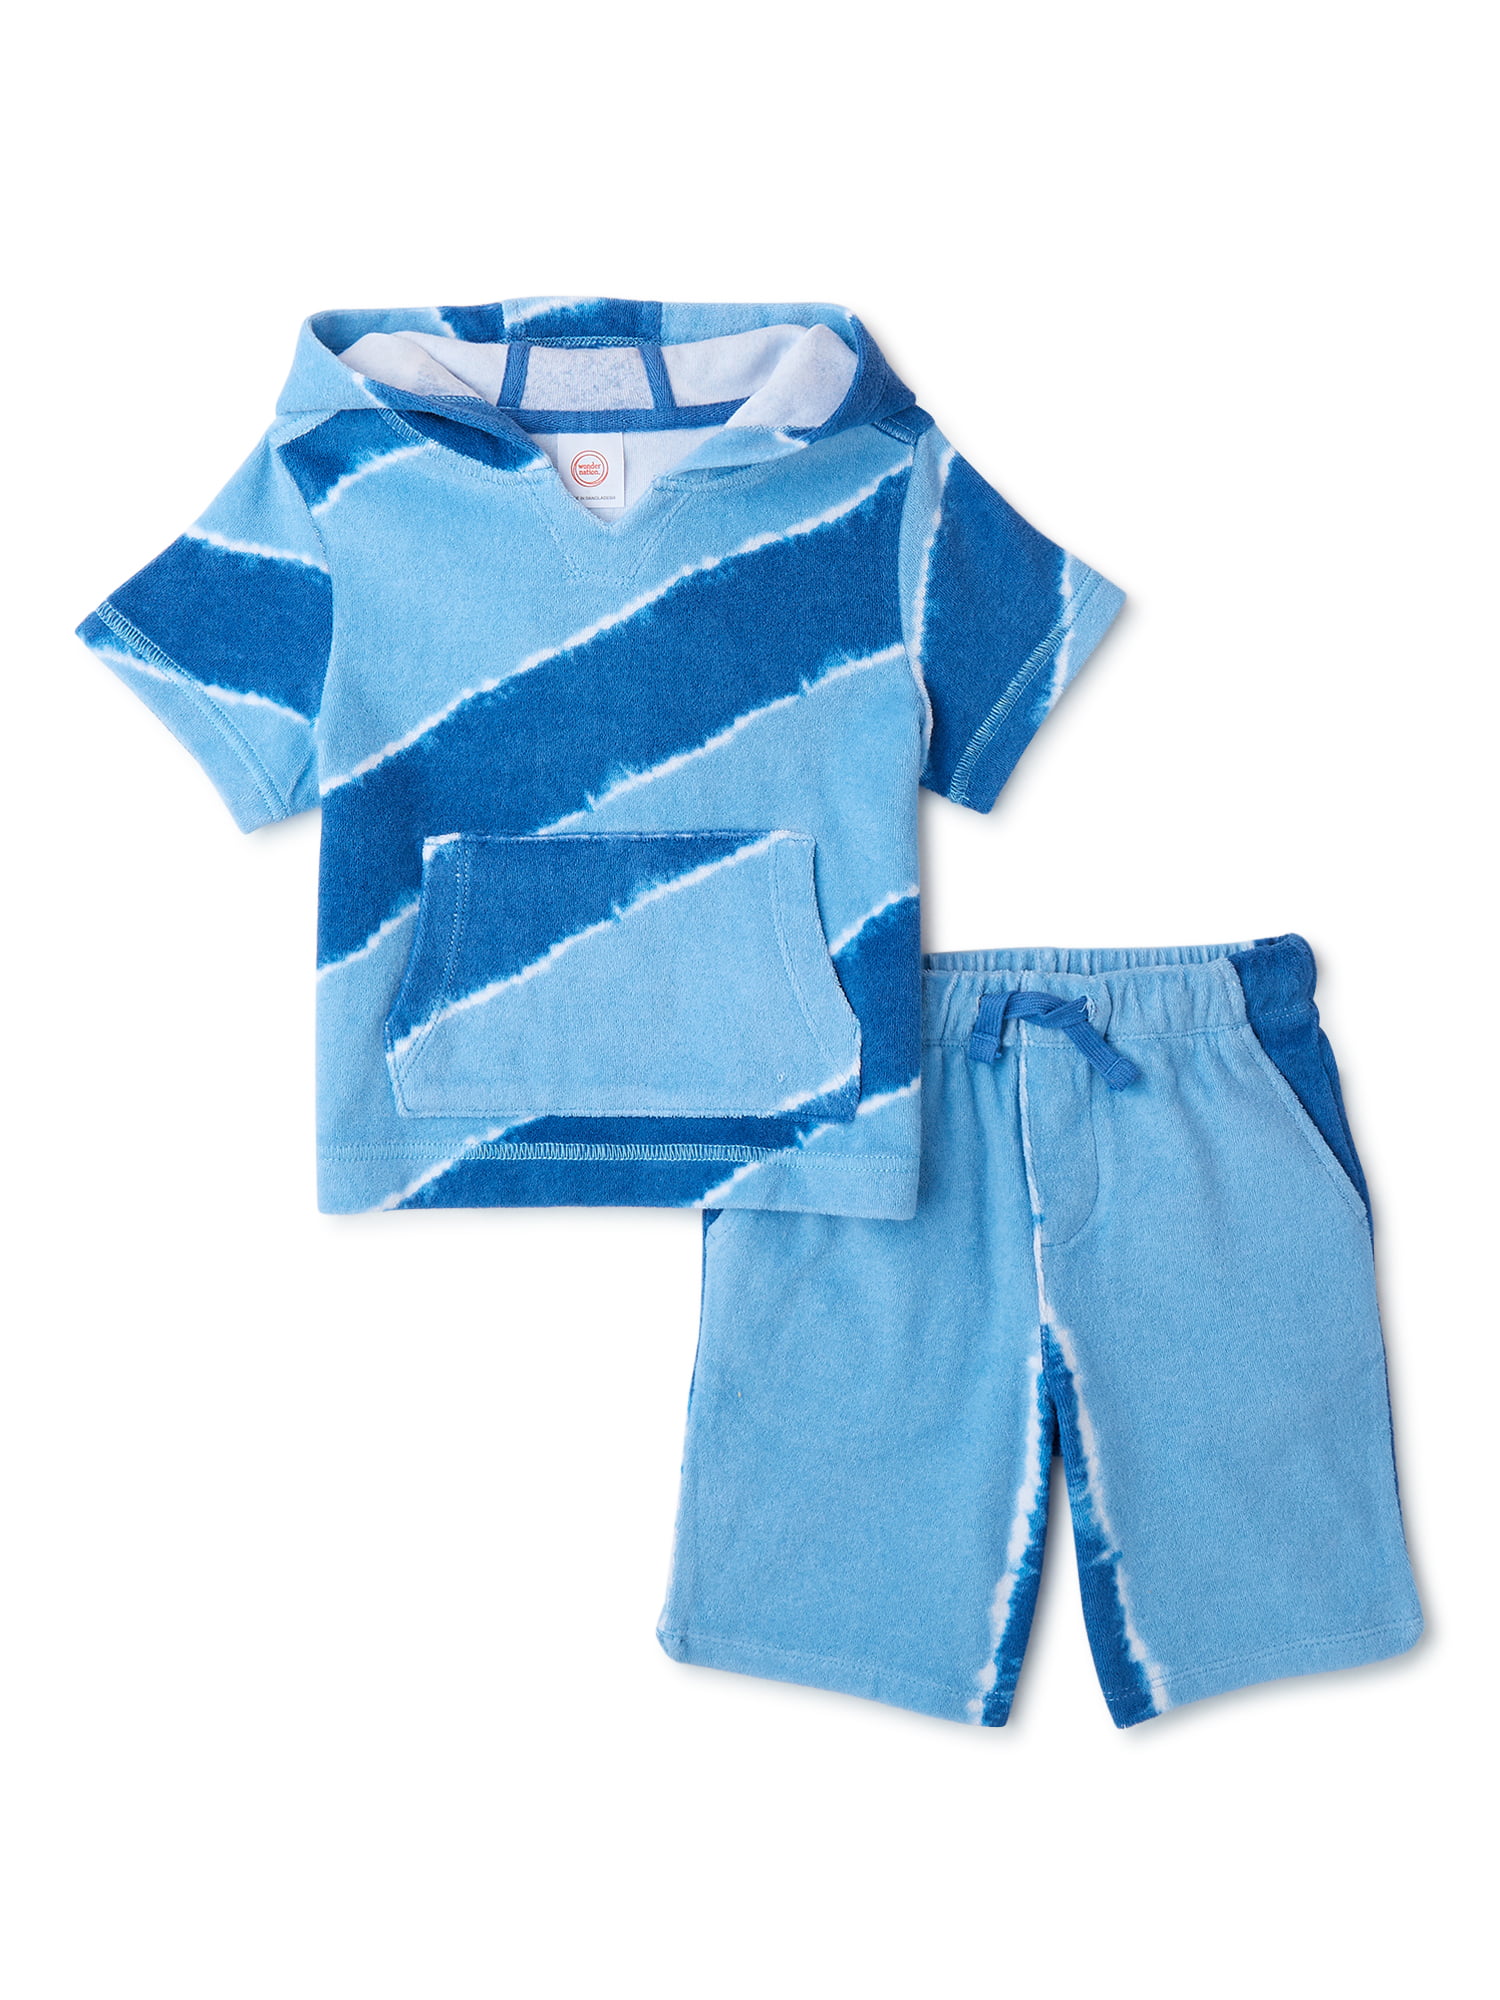 Wonder Nation Unisex Baby & Toddler Blue Hoodie & Shorts 2-Piece Outfit Set 